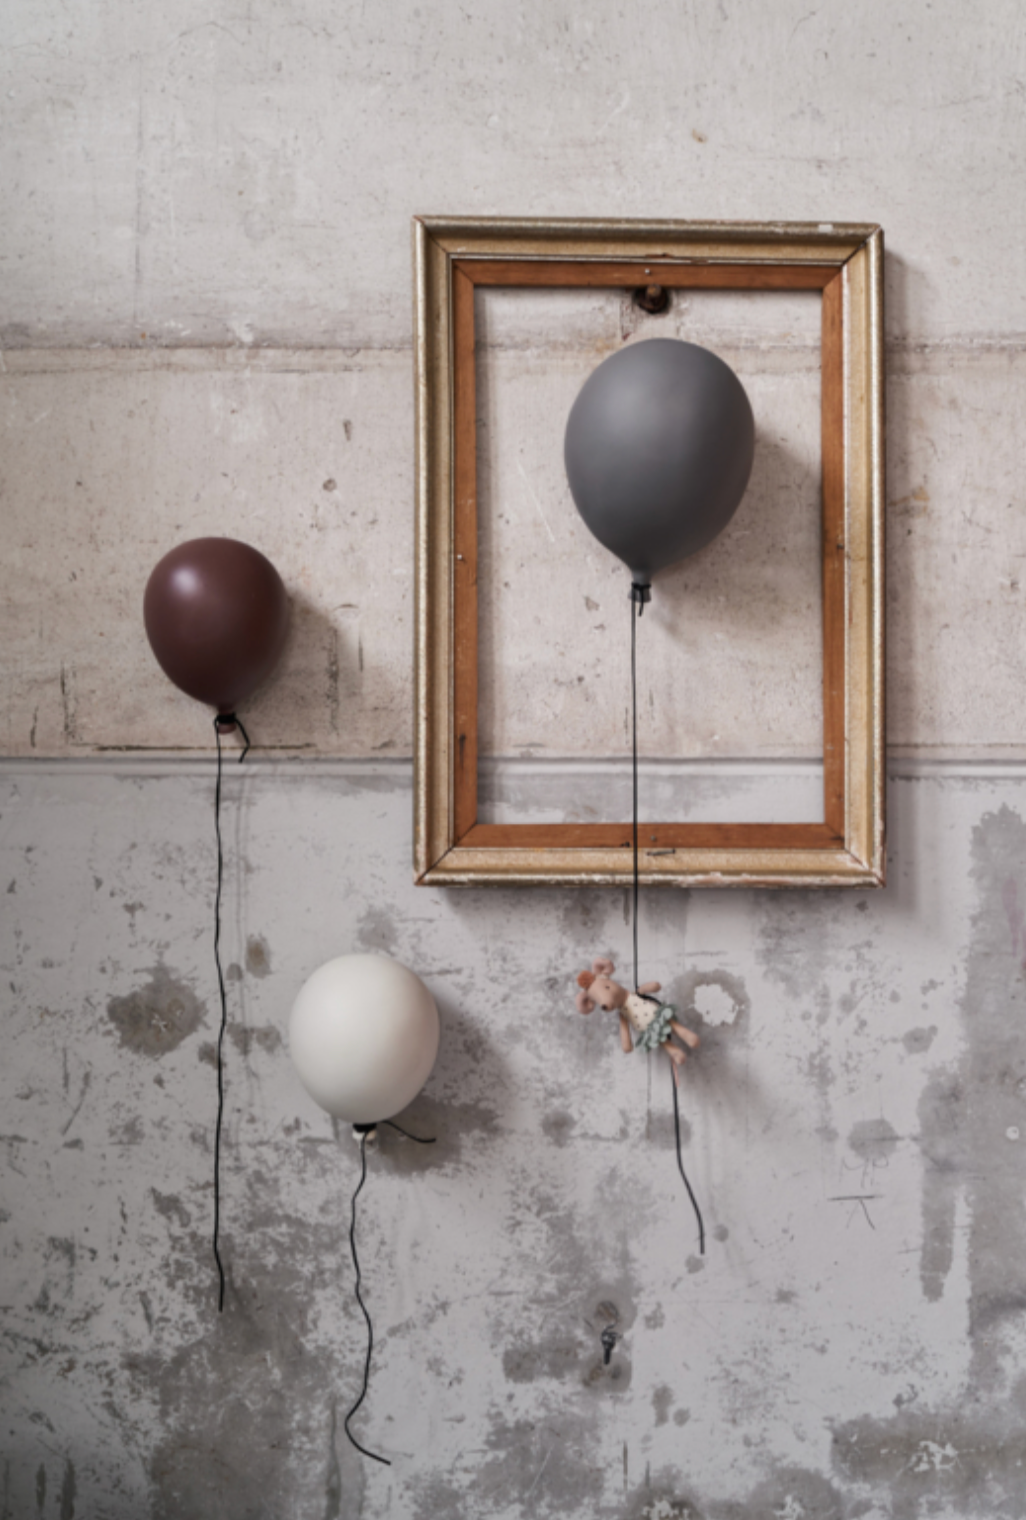 By ON Ceramic Balloon Wall Decoration, Grey